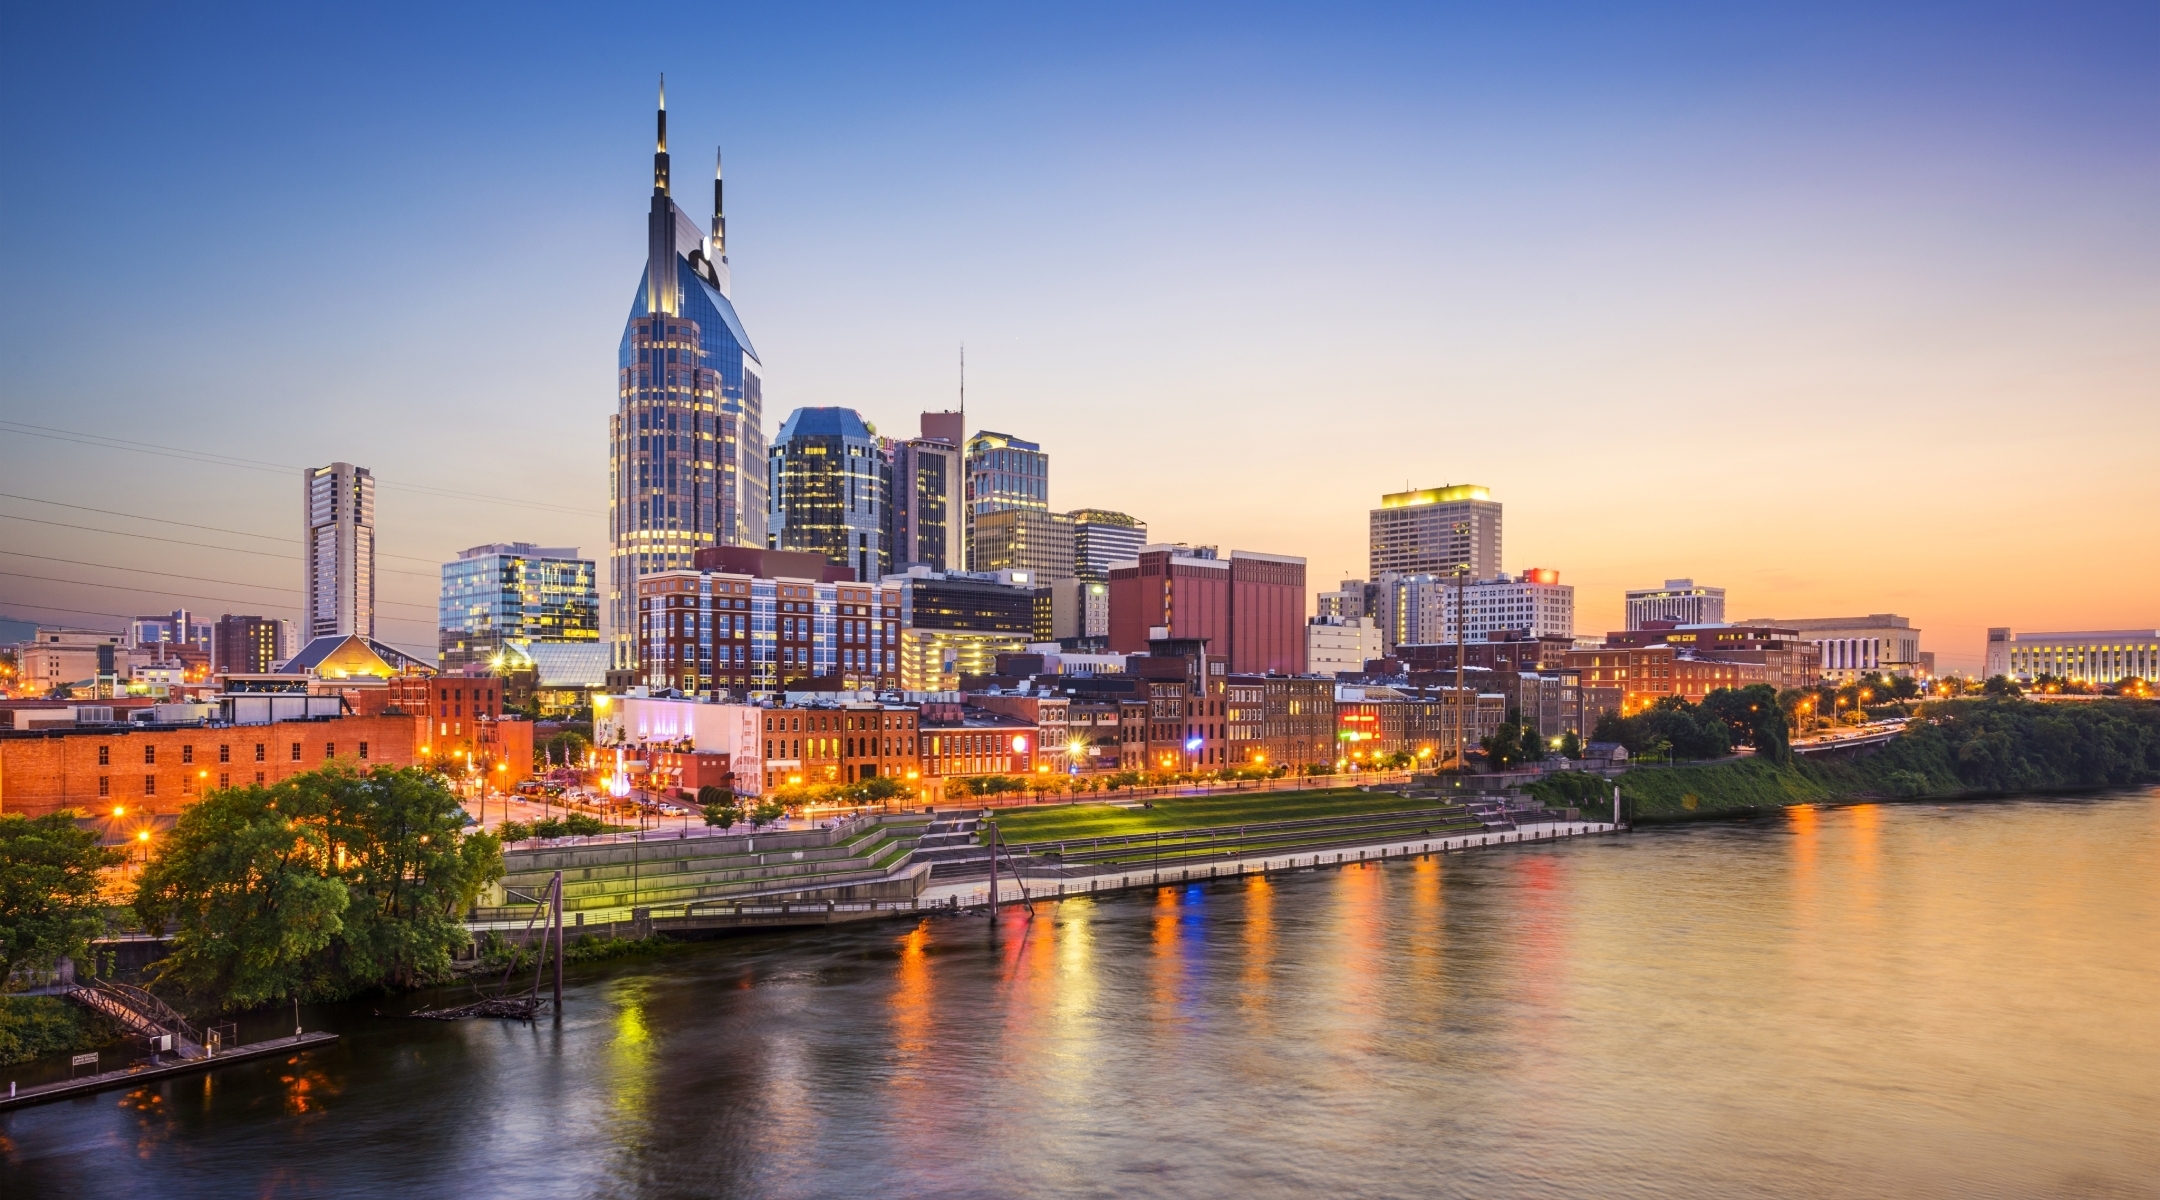 Evening view of downtown across a river in Tennessee